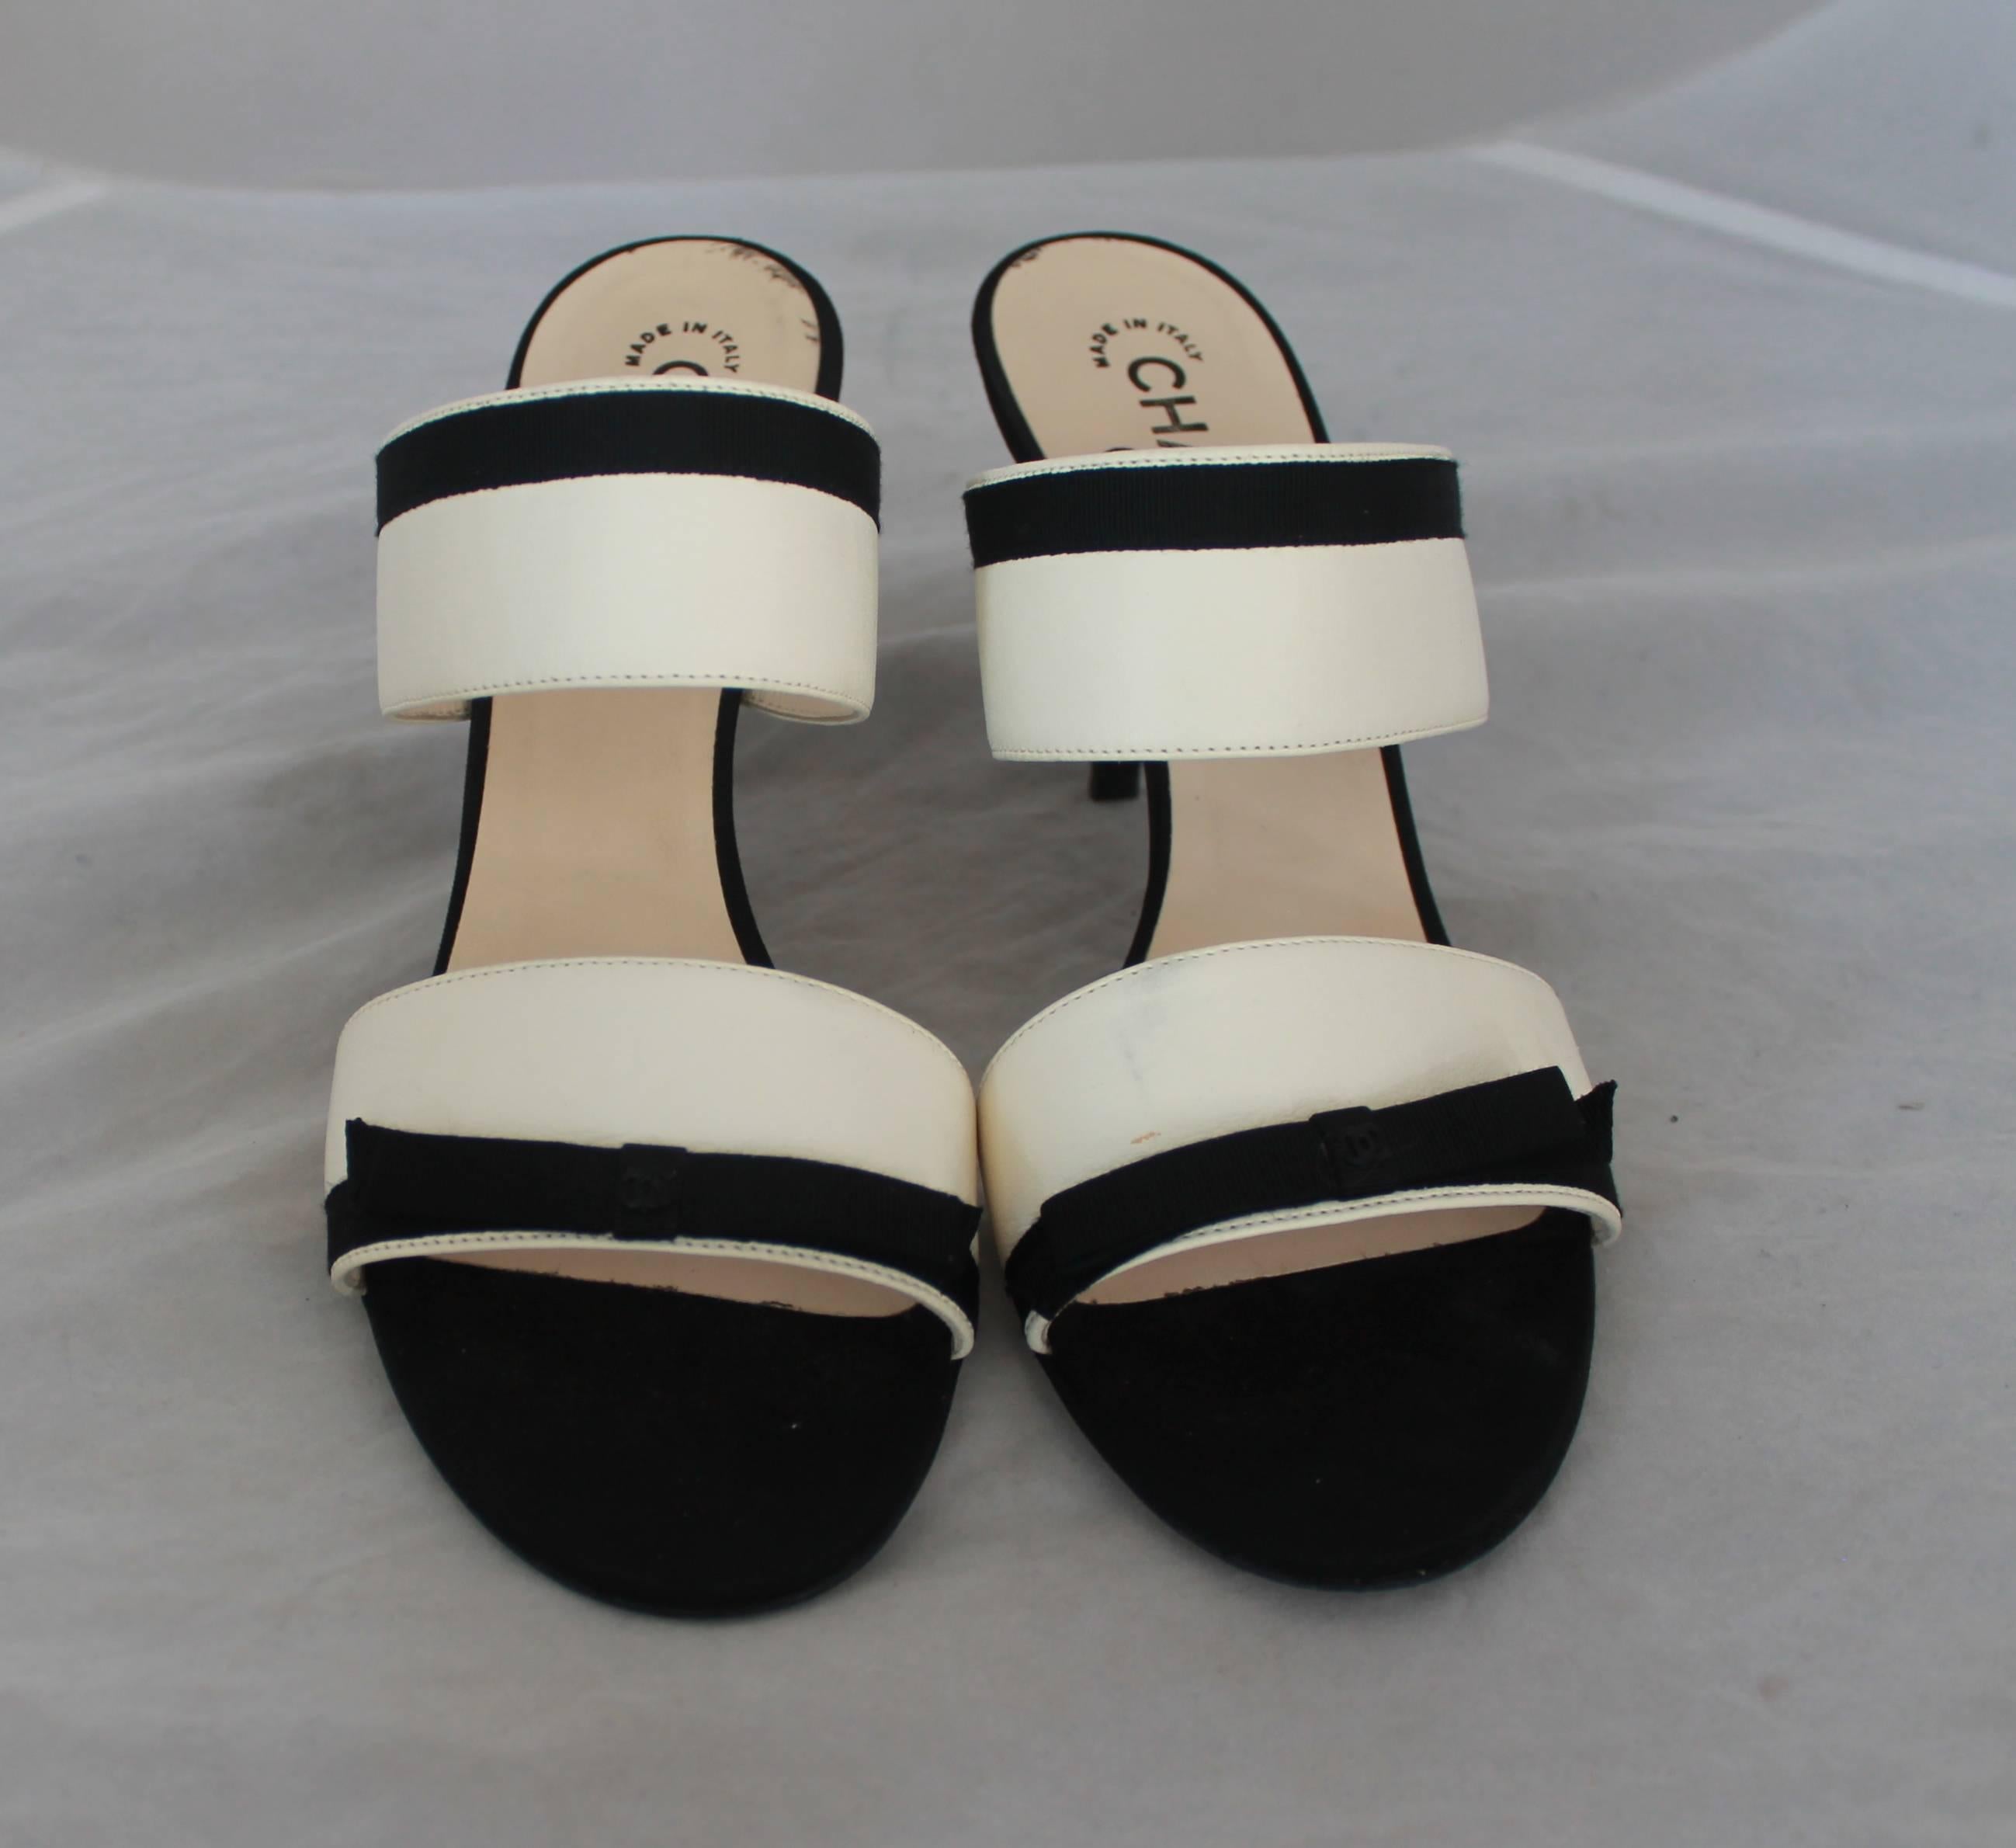 Chanel Ivory Lambskin Double Strap Heels w/ Black Grosgrain Ribbon Trim - 40.  These lovely double strap heels feature smooth ivory lambskin, black ribbon trim, and a black 